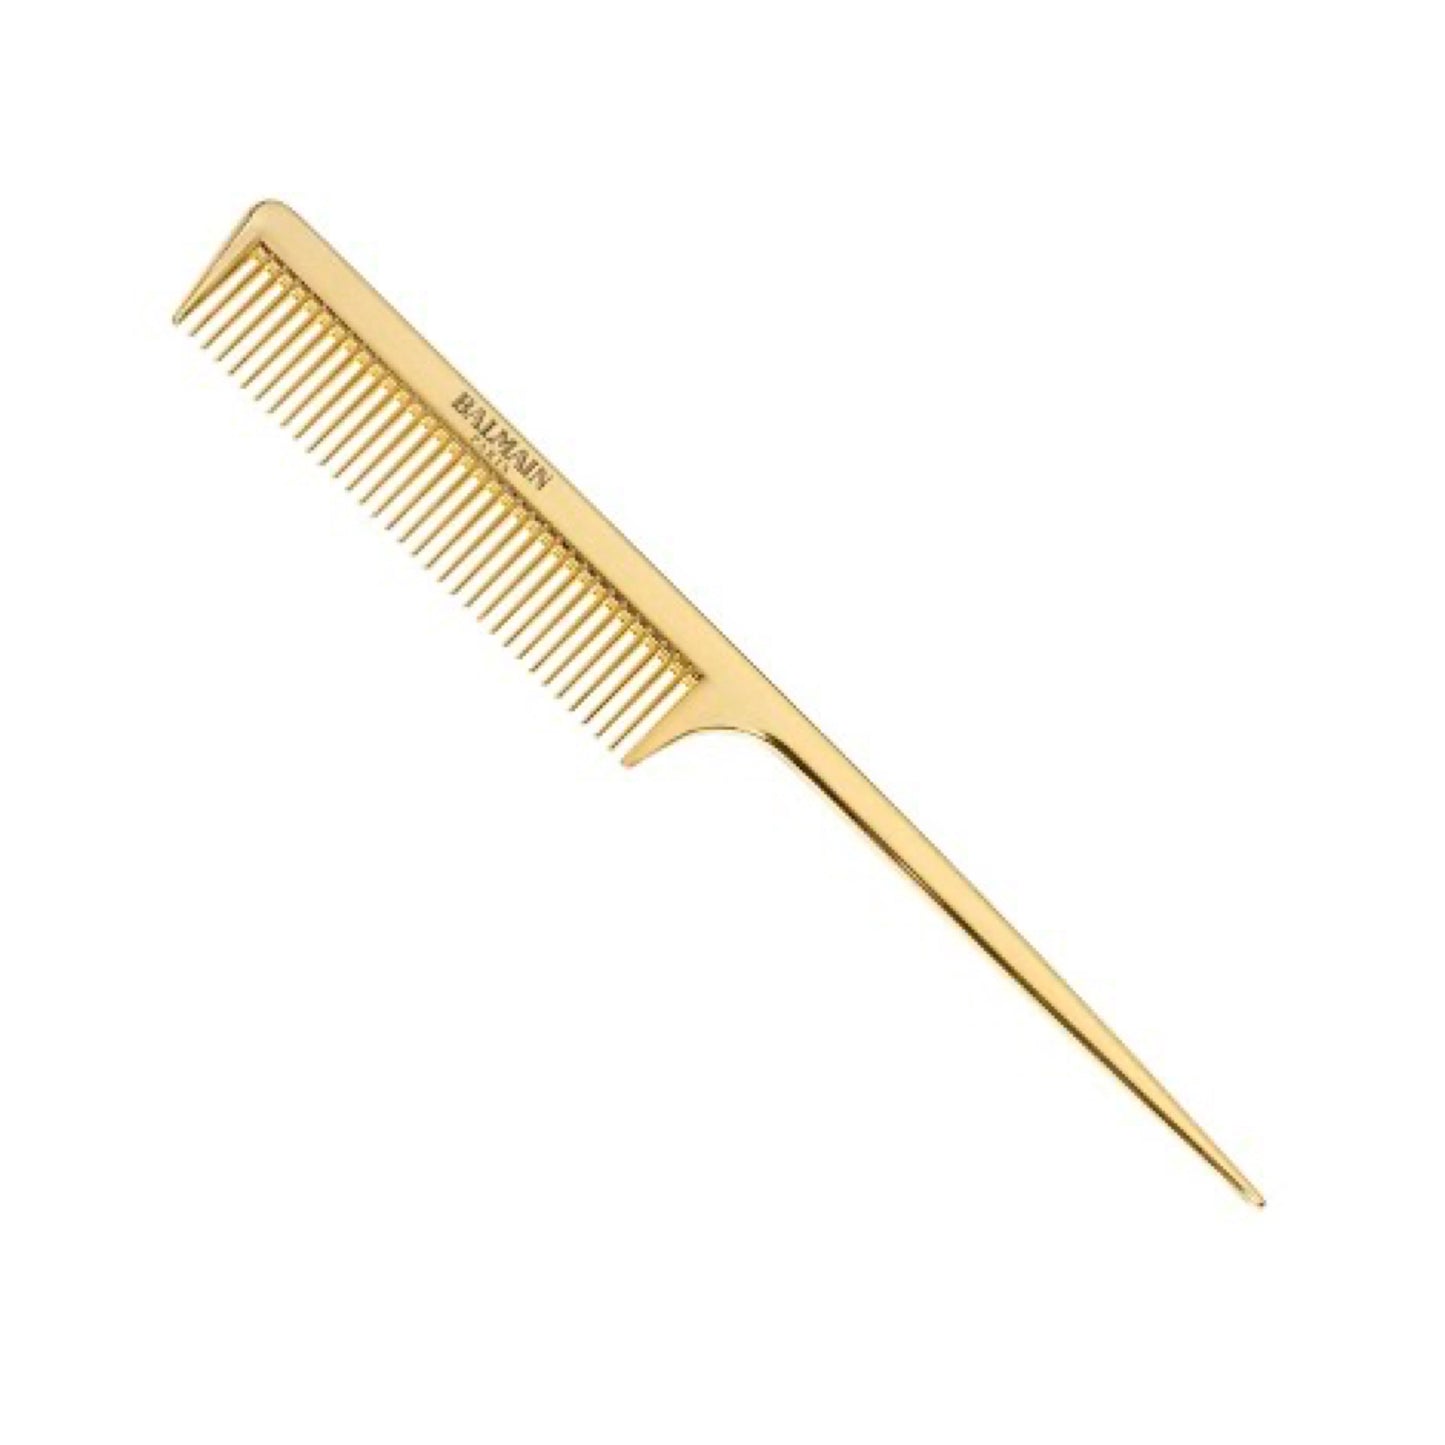 GOLDEN TAIL COMB